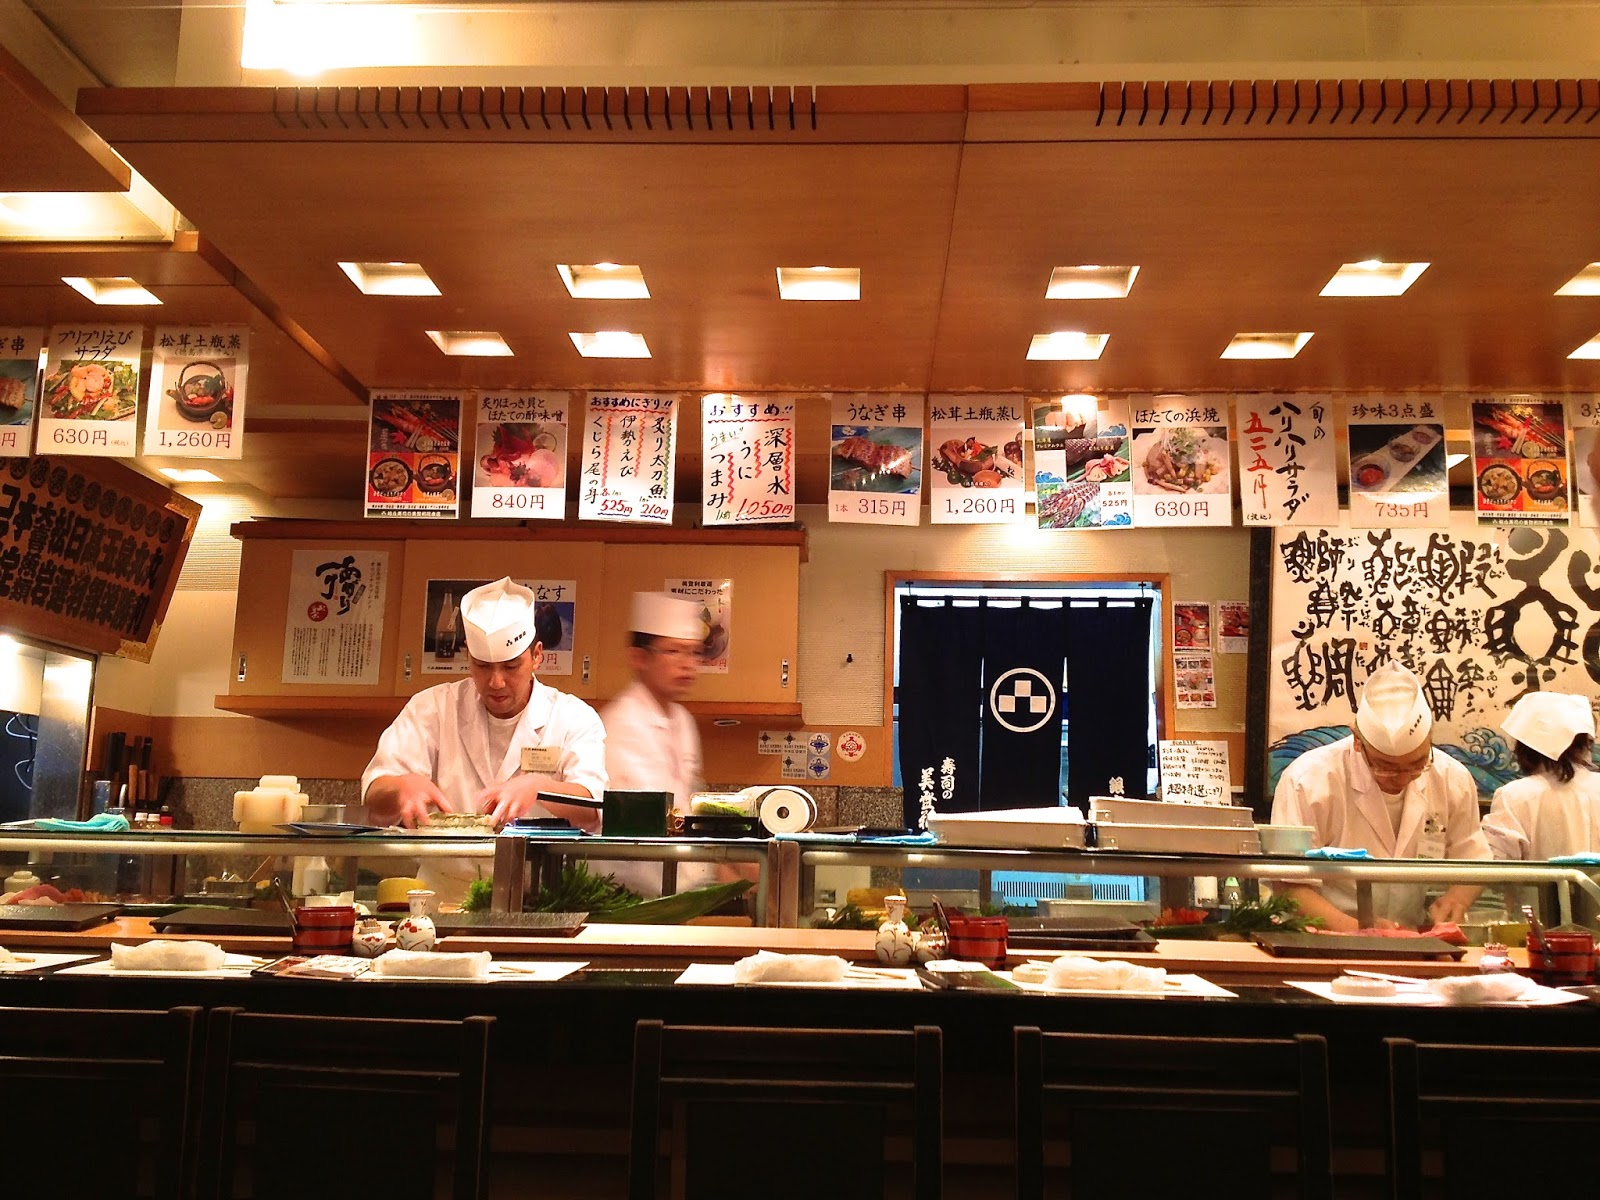 Famous Restaurant in Japan Defends Rules against Foreigners / Update on